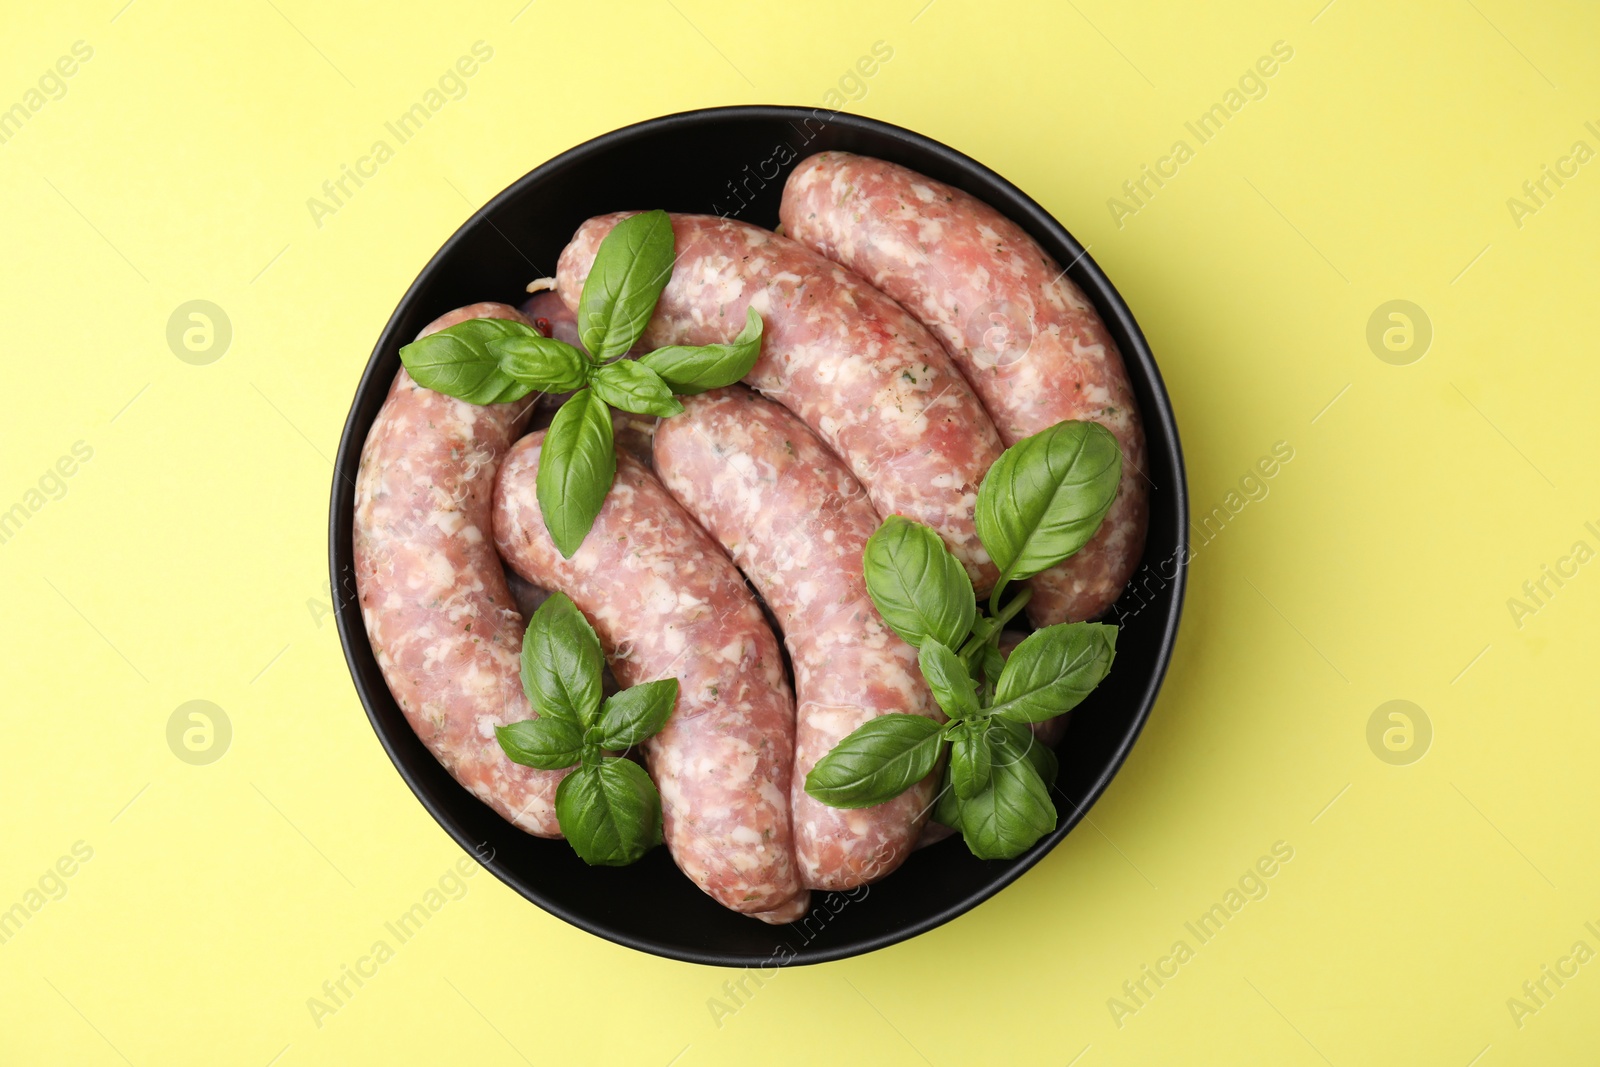 Photo of Raw homemade sausages and basil leaves in bowl on yellow background, top view